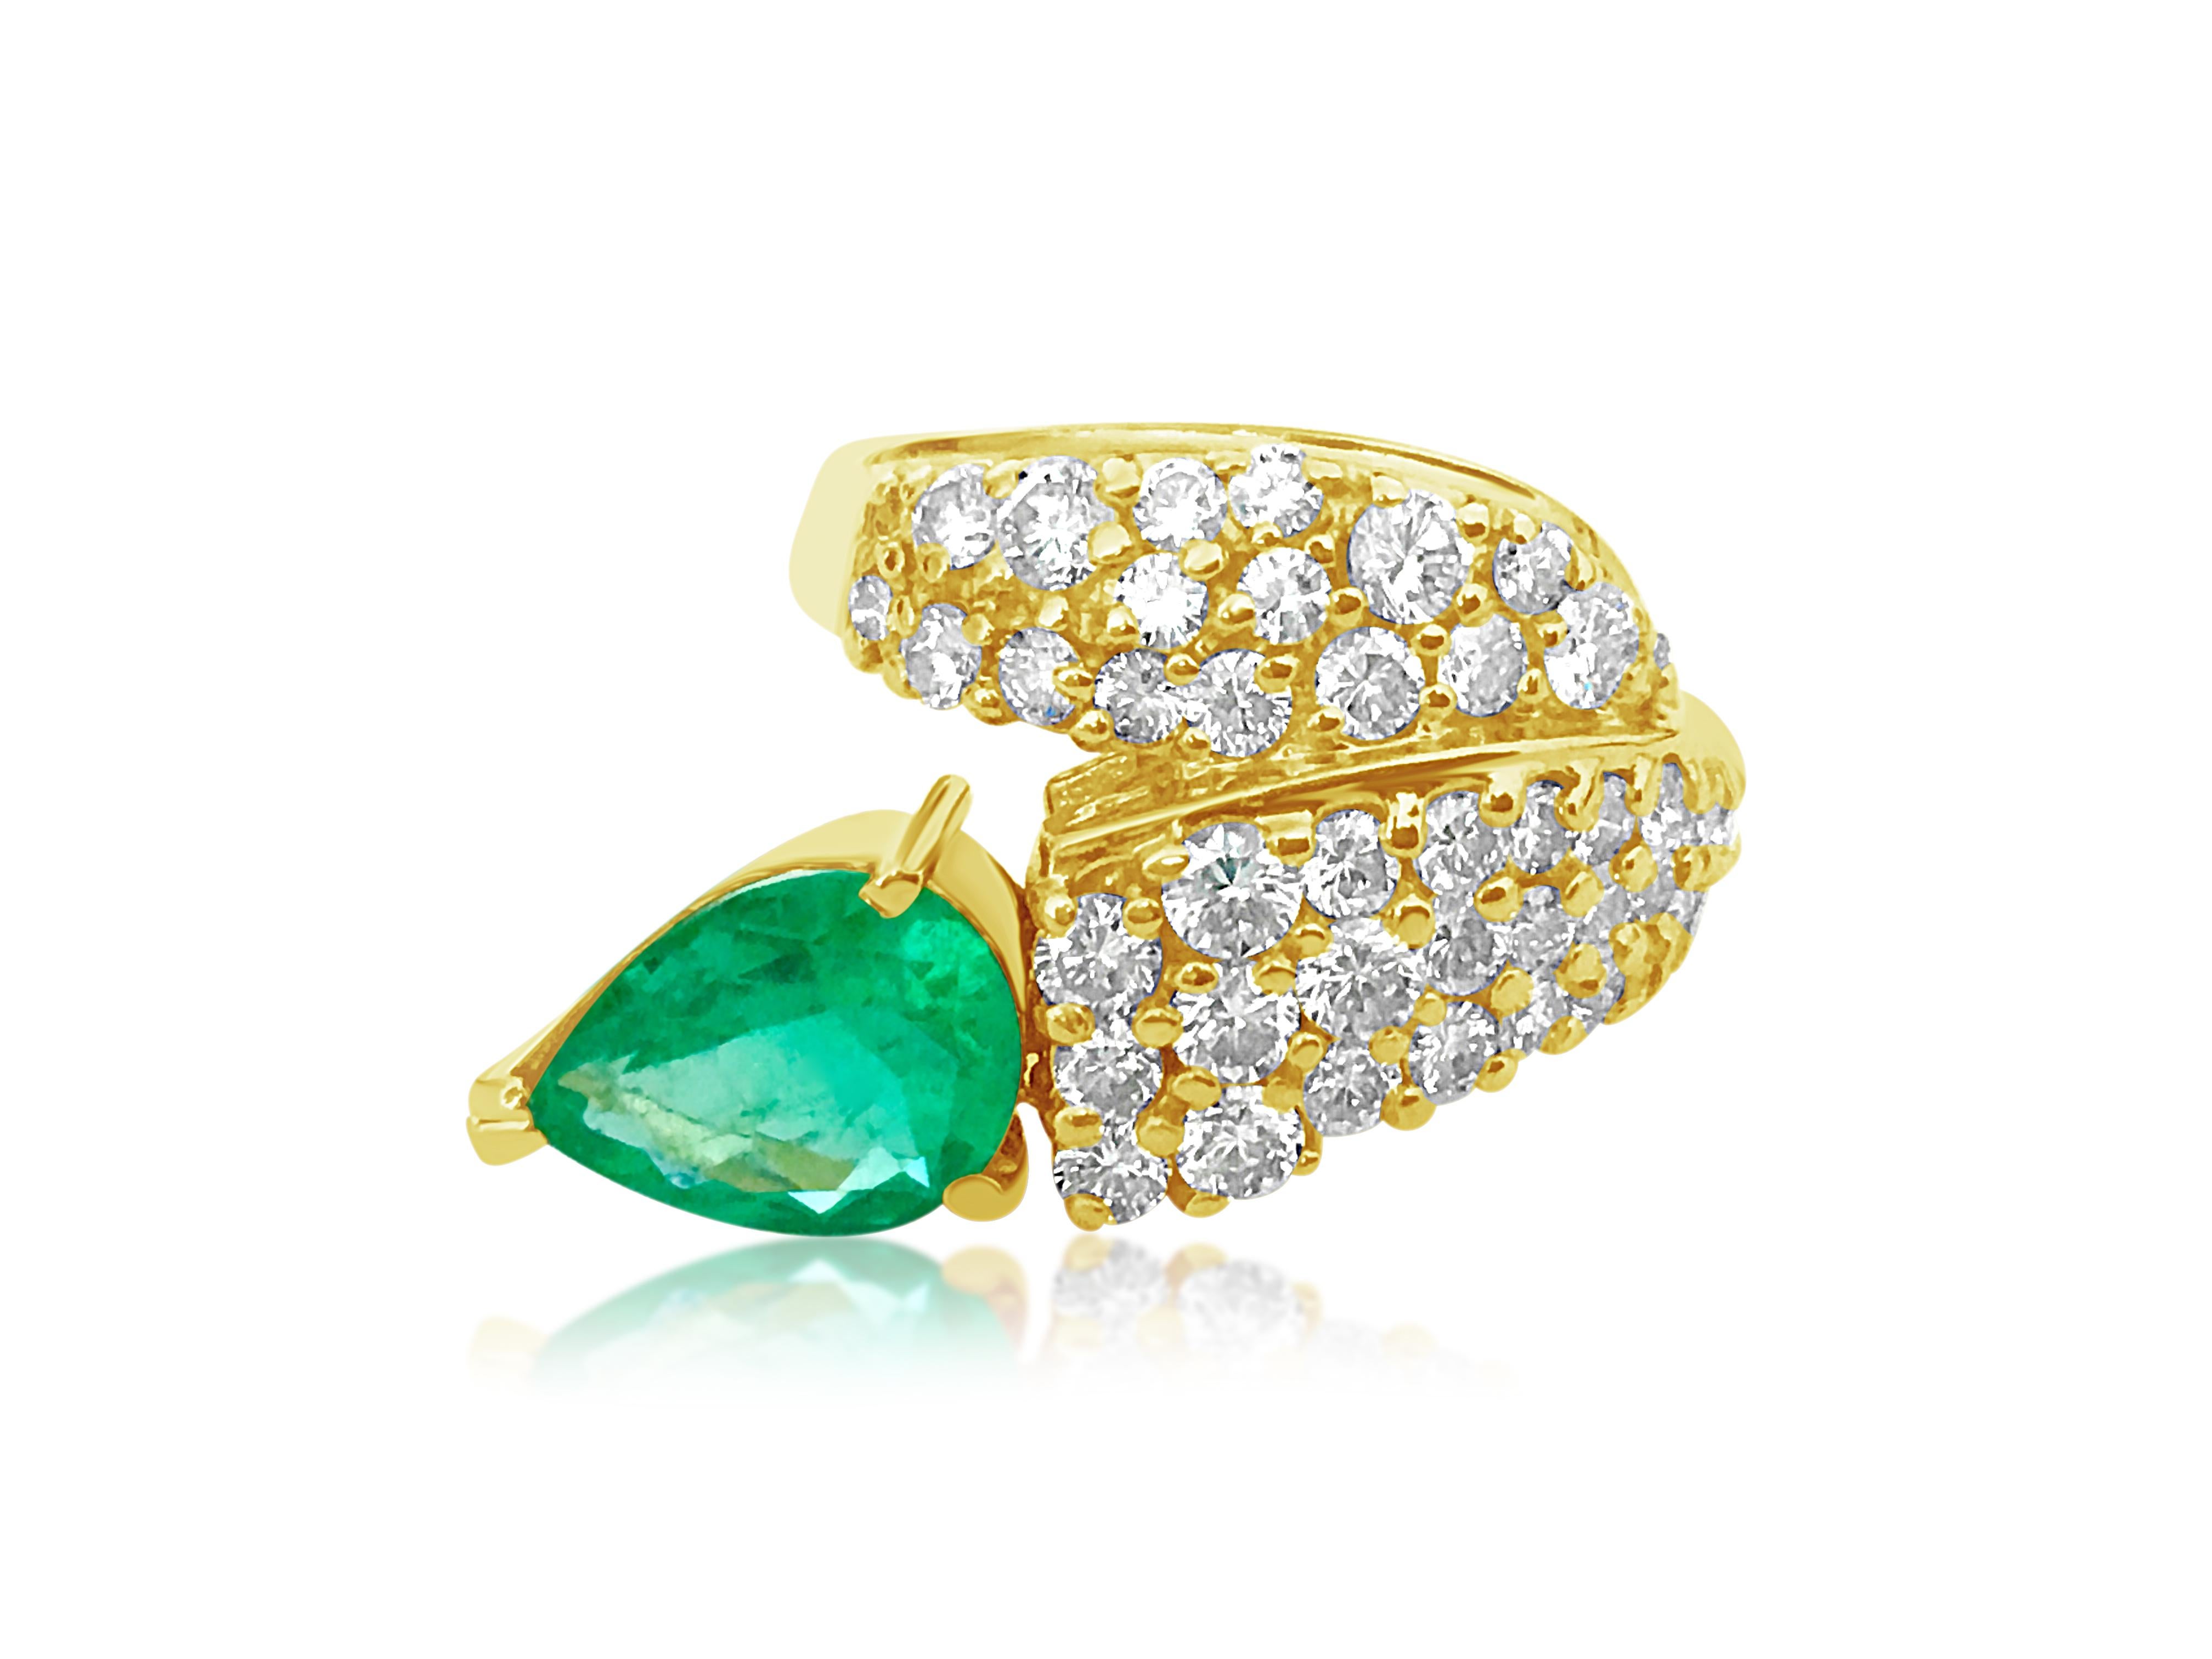 Pear Cut Natural 4.25 Carat Colombian Emerald and Diamond Ring in 14 Karat Gold For Sale